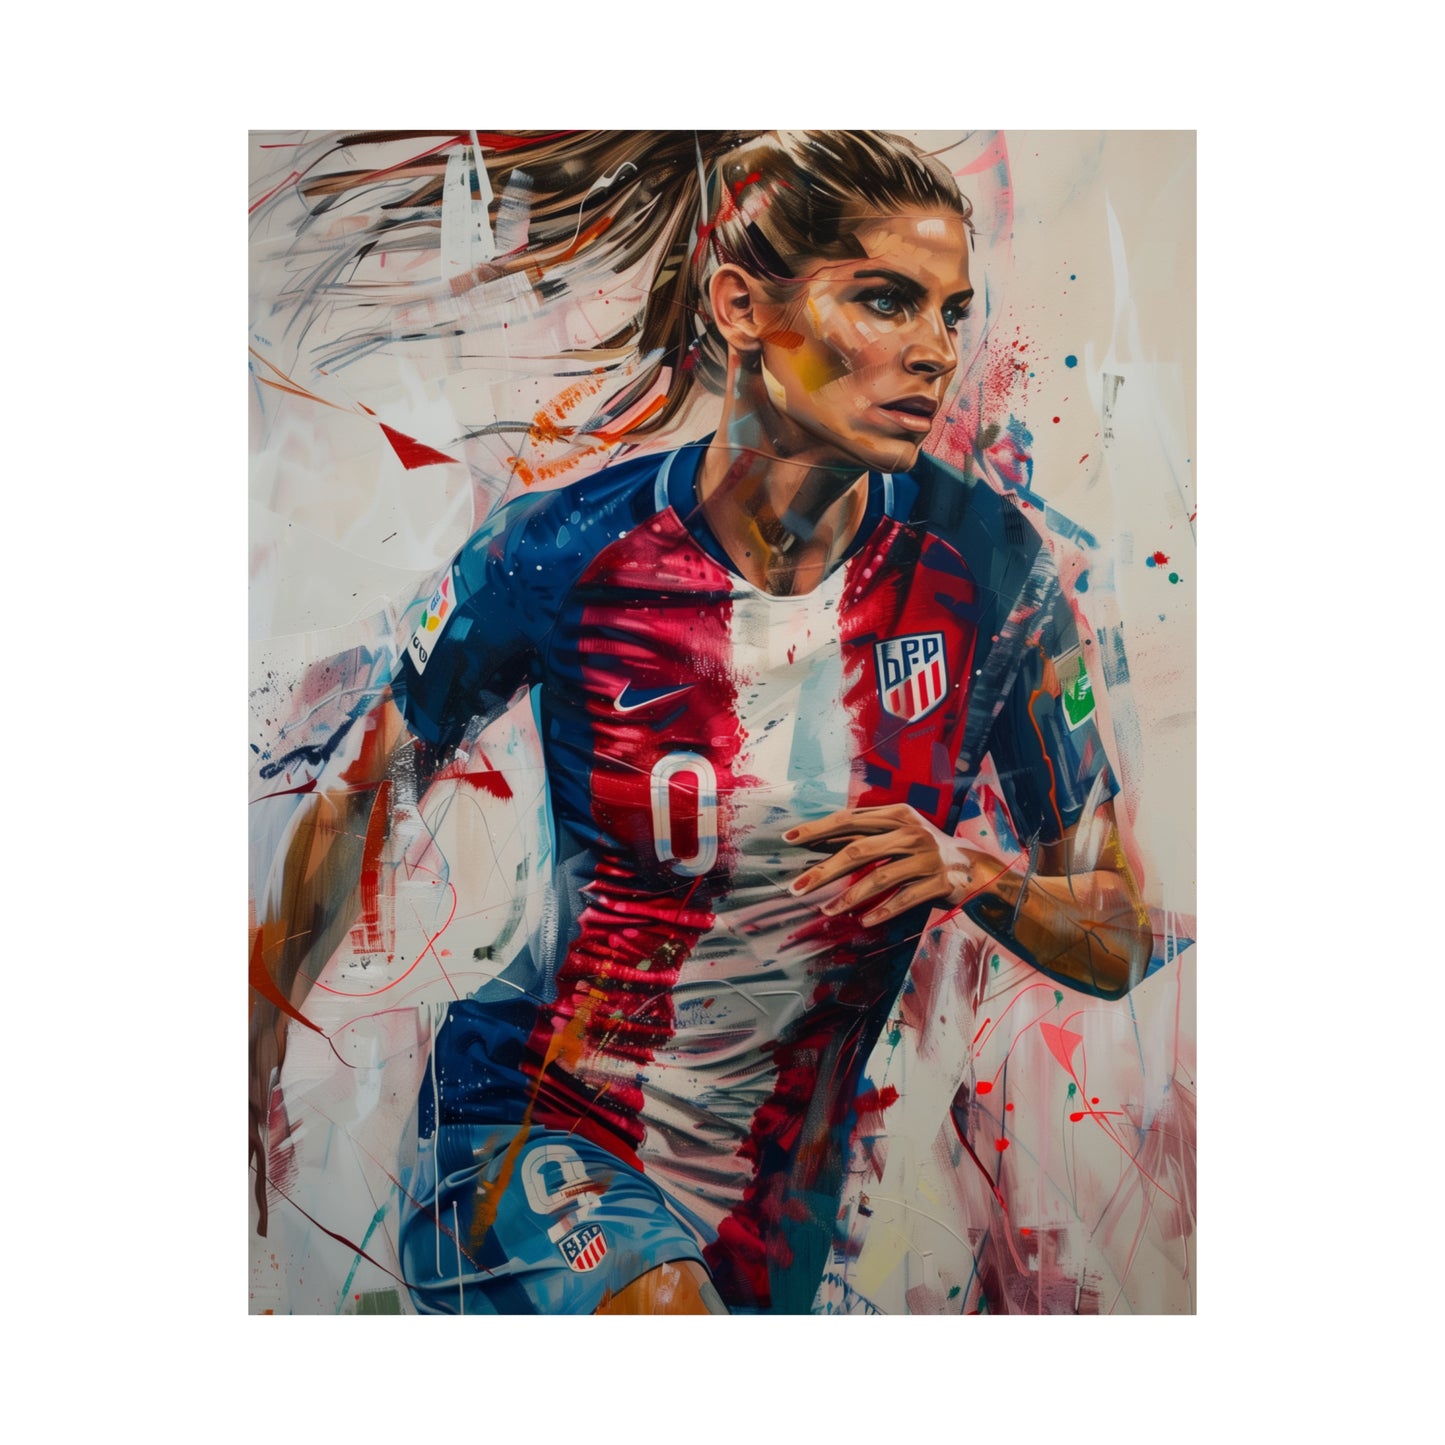 "Alex Morgan's Triumph: A Canvas of Grit and Glory"